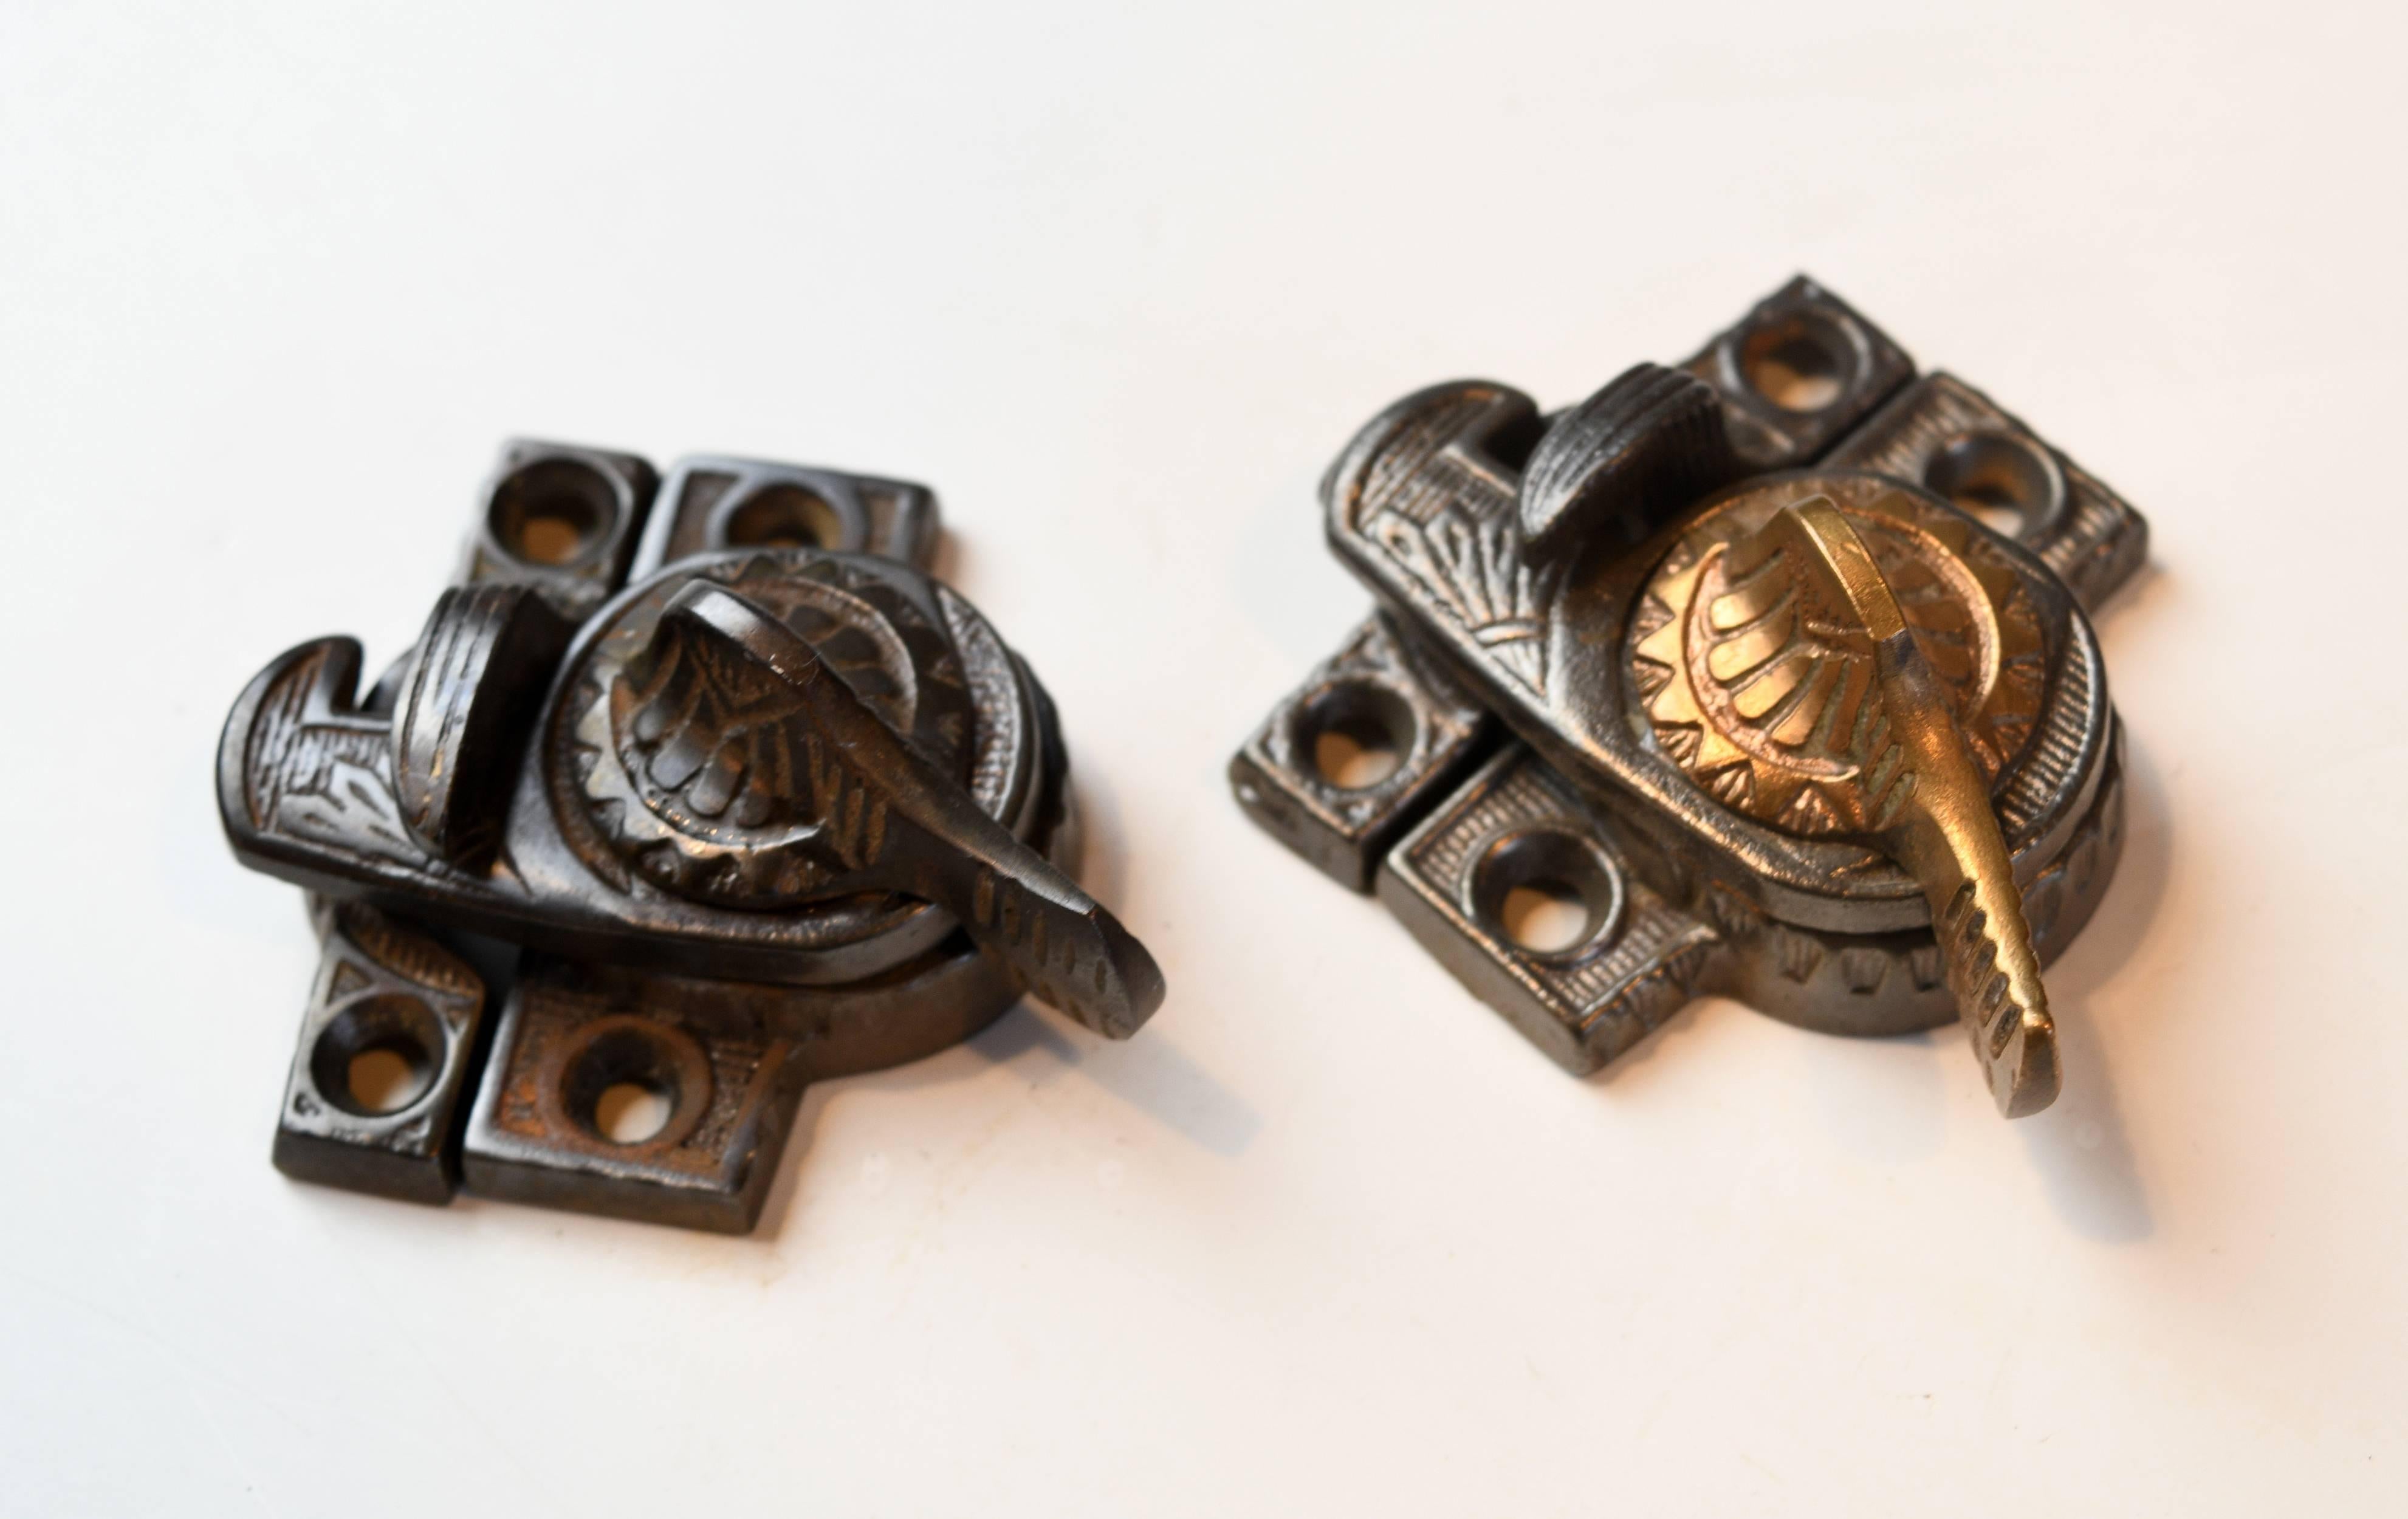 Eagle Claw design window locks. Eastlake styling of cast iron with iron or bronze thumb lock. 

Variants: A. Iron thumb lock (12 available) / B. bronze thumb lock (11 available)